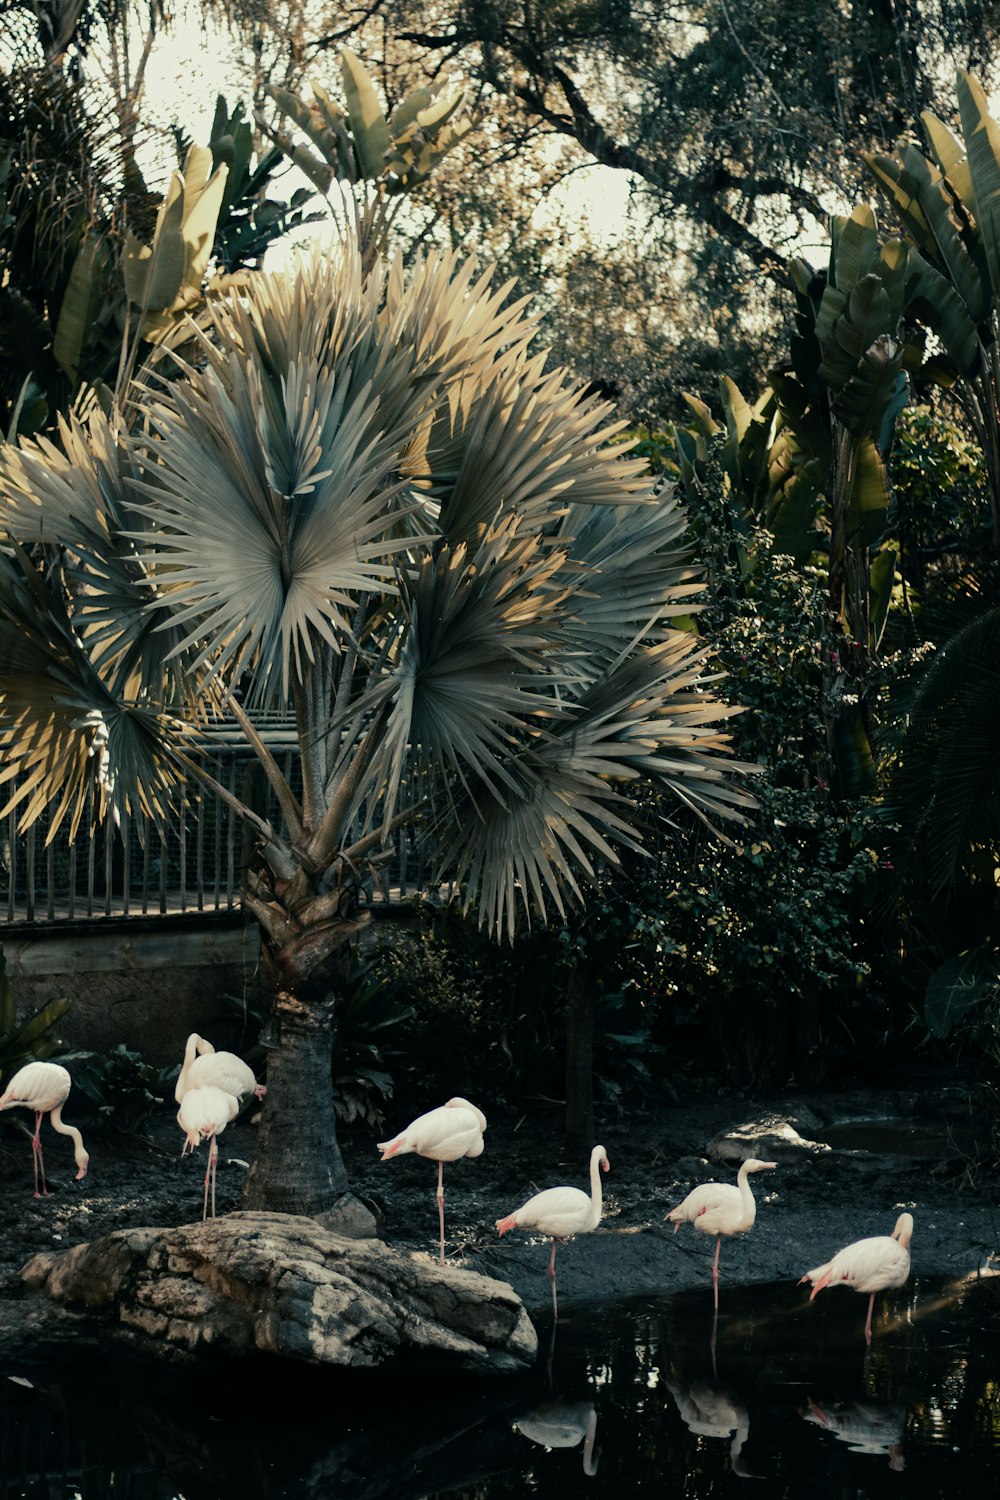 a group of flamingos standing in a pond next to a palm tree